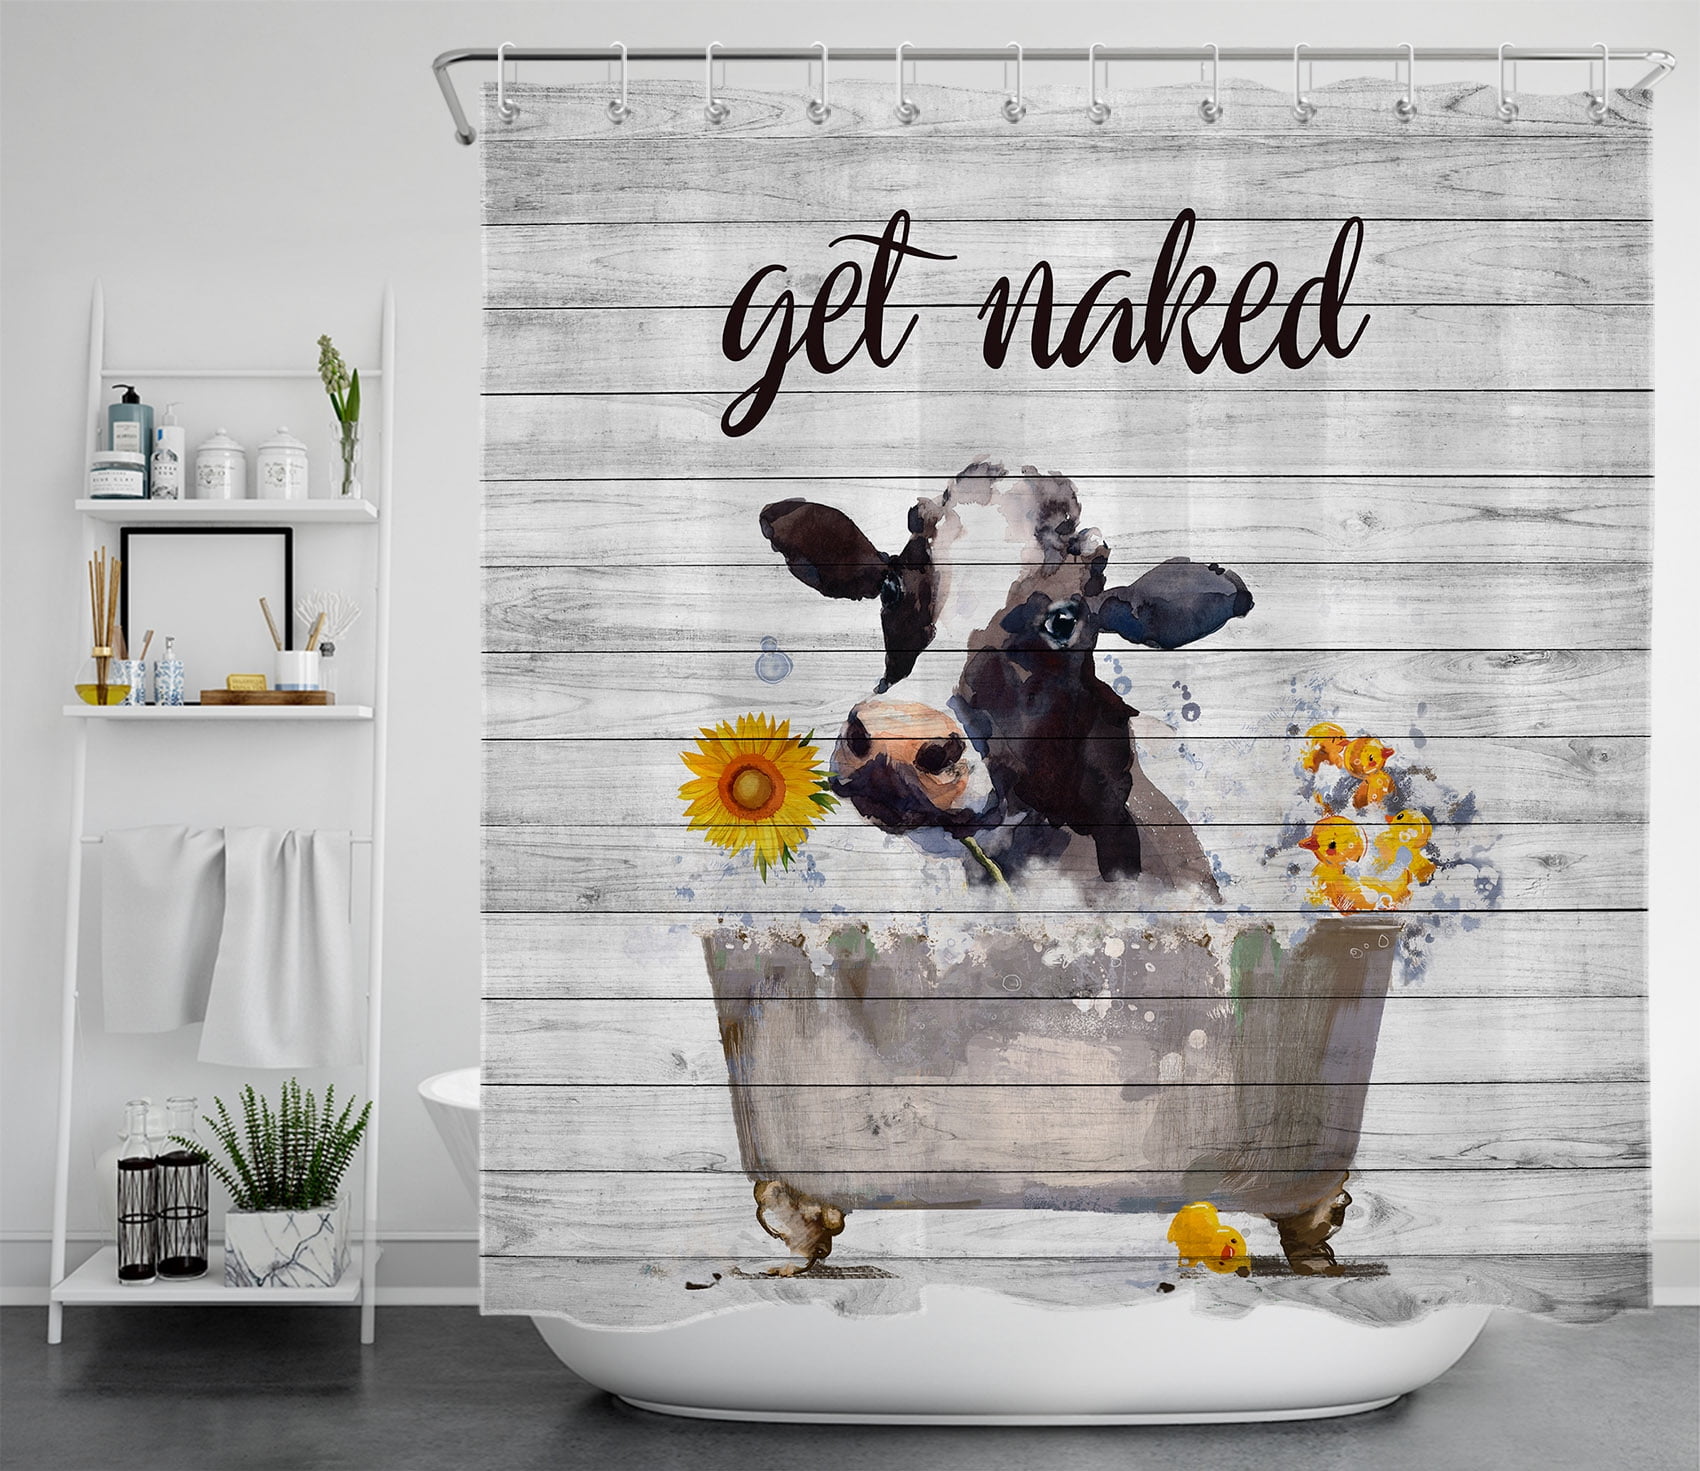 Details about   Funny Cow Heifers Sunflowers Wood Plank Fabric Shower Curtain Set Bathroom Decor 